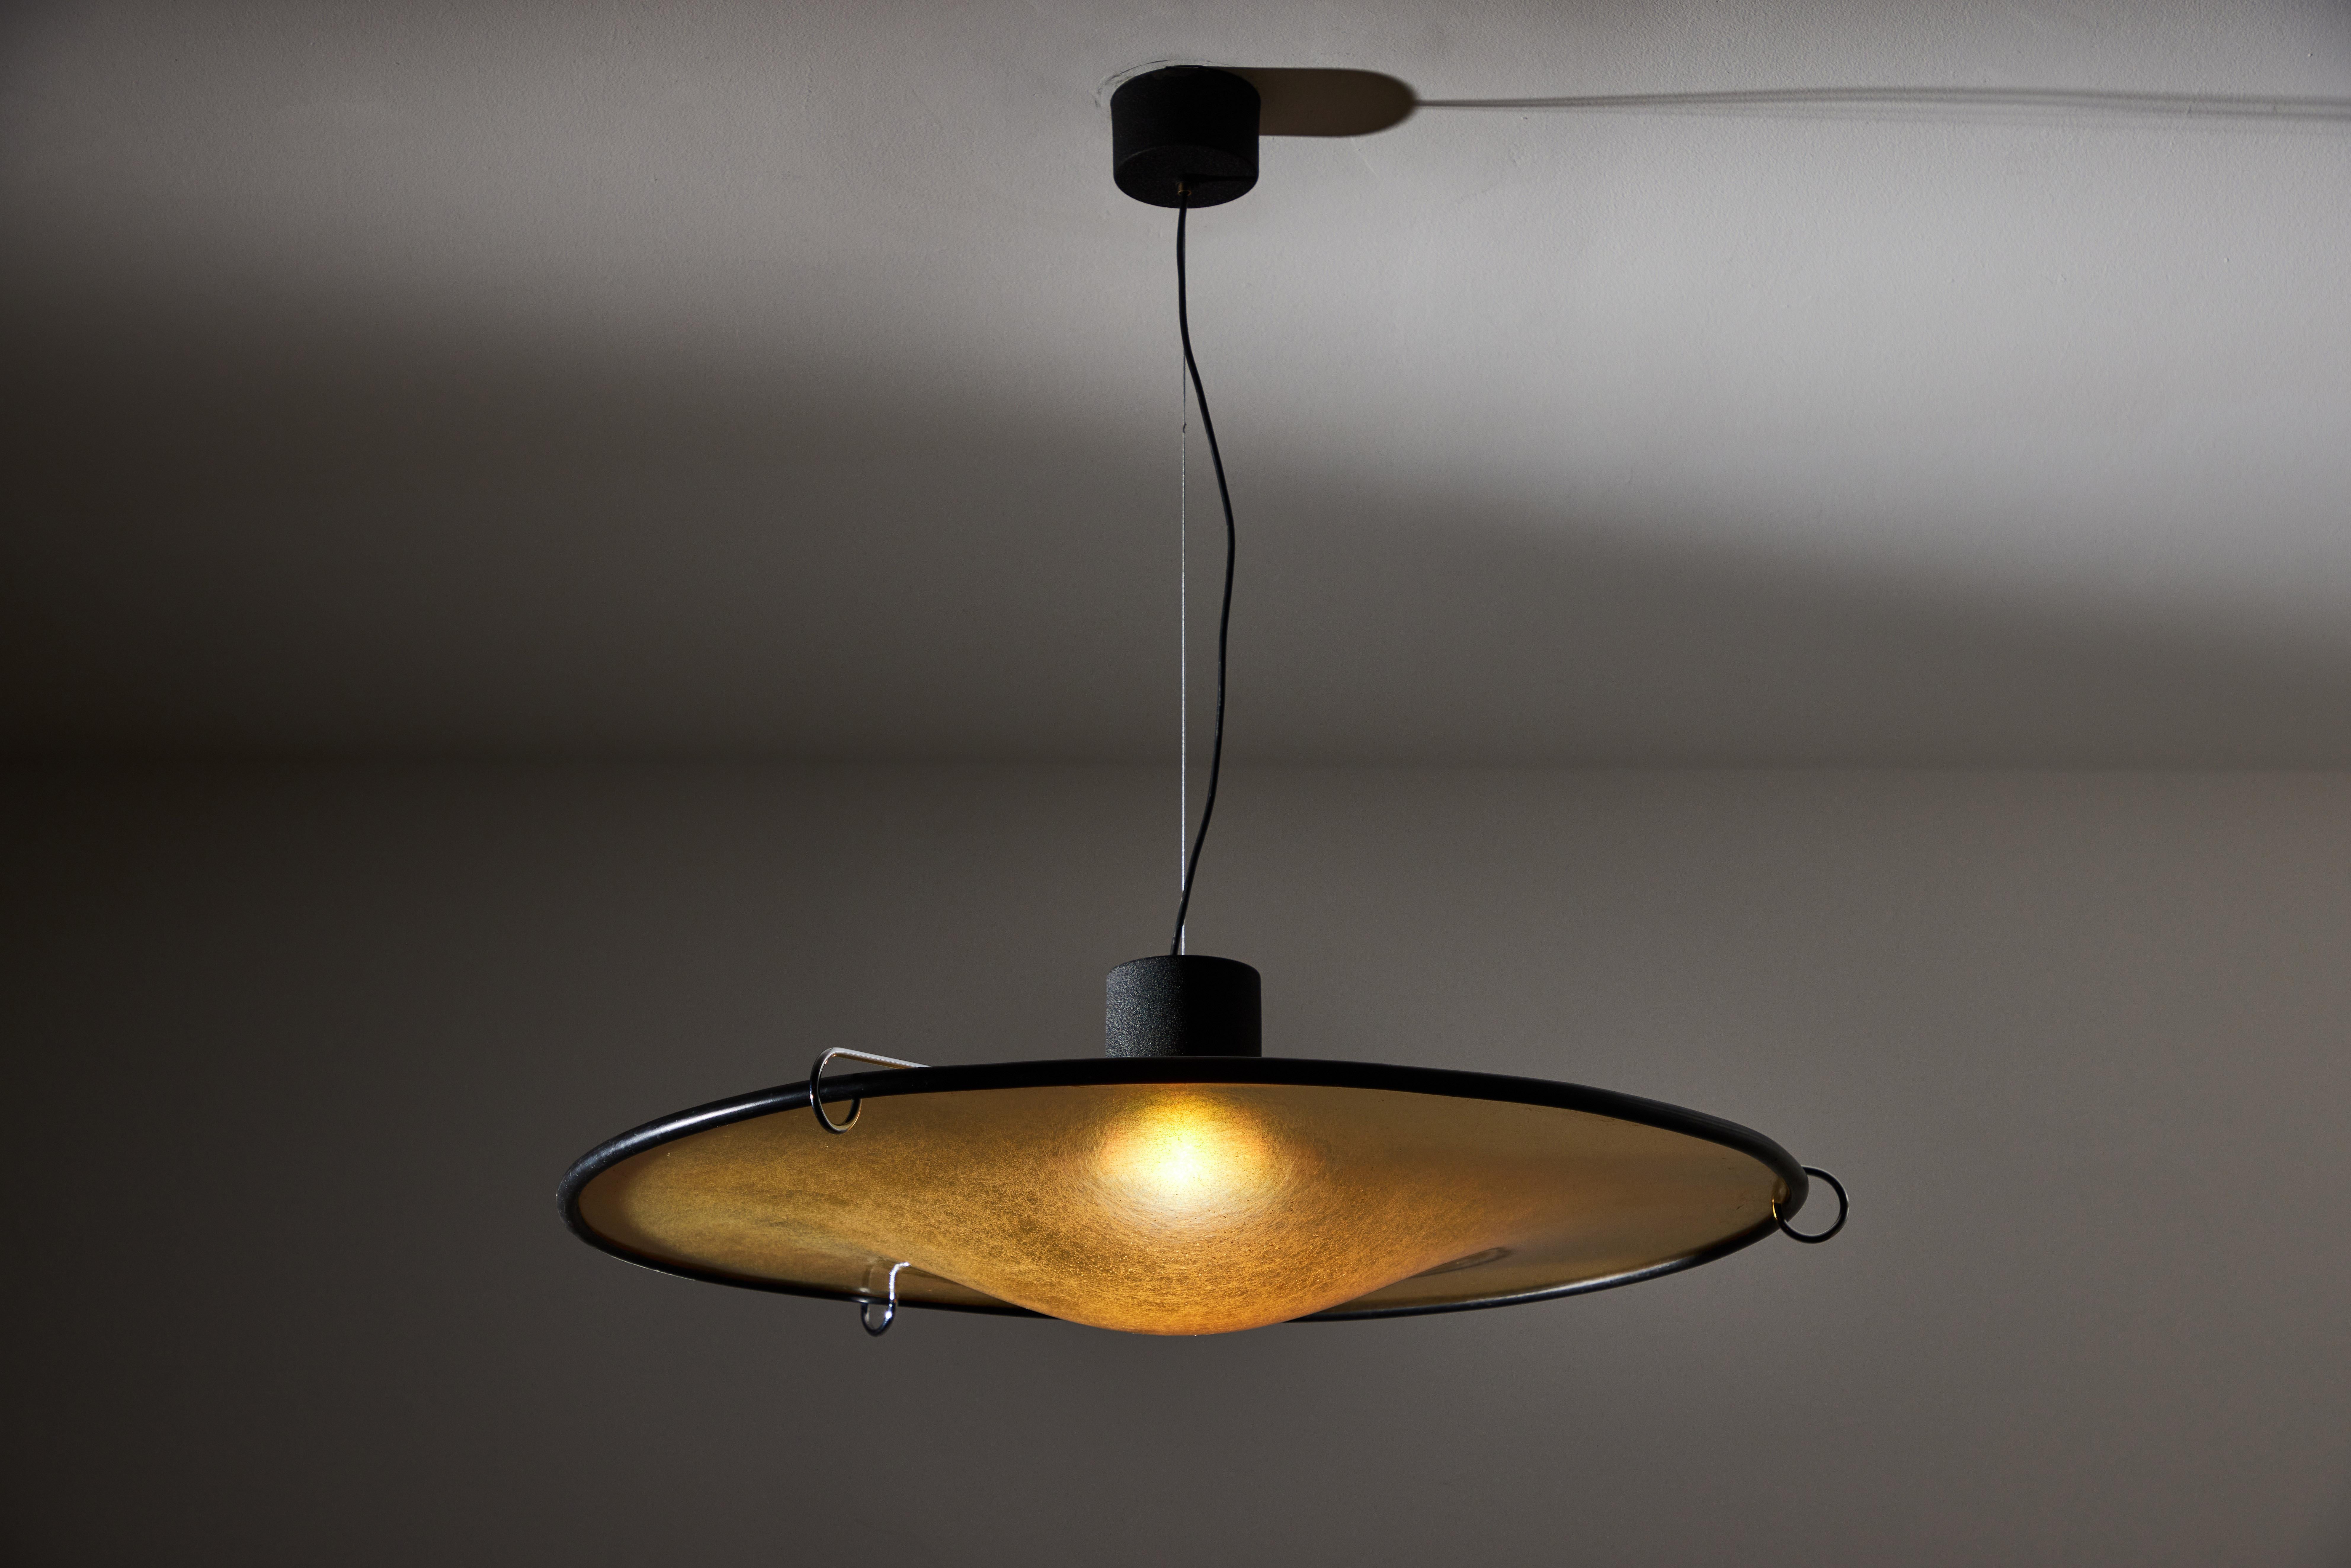 Suspension Light by Luci-Cinisello Balsamo. Designed and manufactured in Italy, circa 1970's. Fiberglass, rubber, metal. Custom backplate. Original canopy. Rewired for U.S. standards. We recommend one E27 100w maximum bulb. Bulb provided as a one